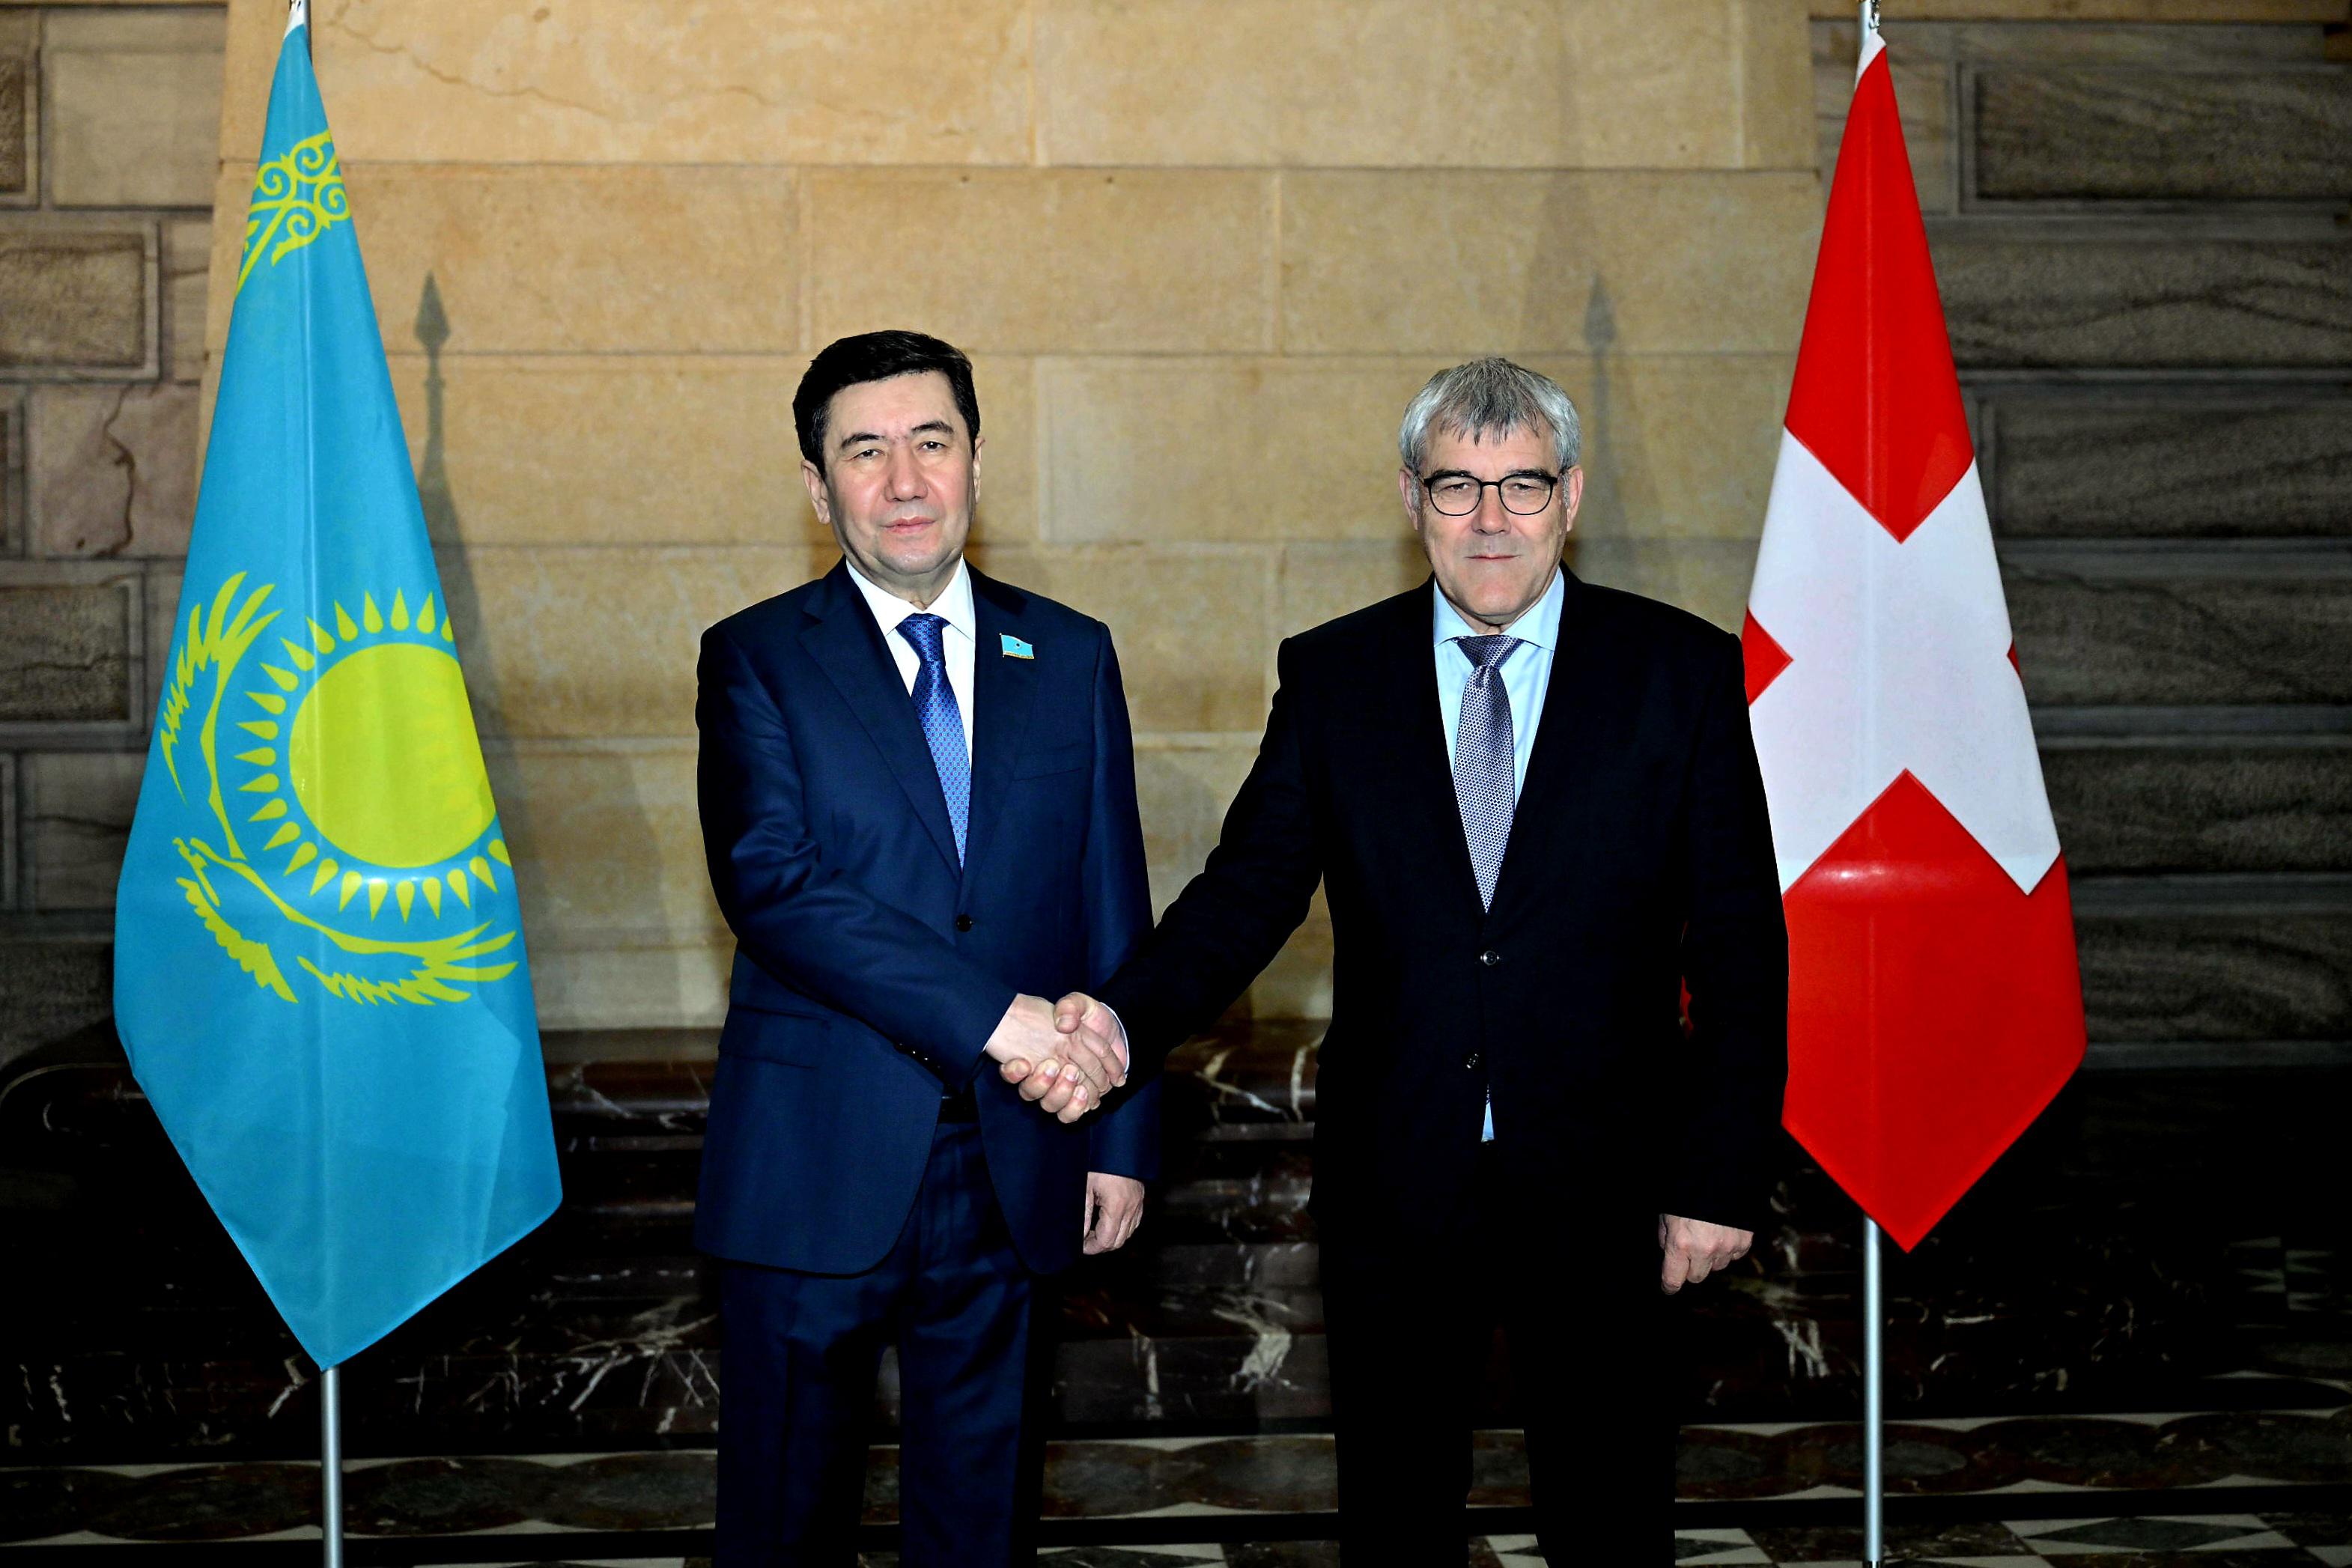 On the visit of the Chairman of the Mazhilis to Bern and the strengthening of the Kazakh-Swiss interparliamentary dialogue